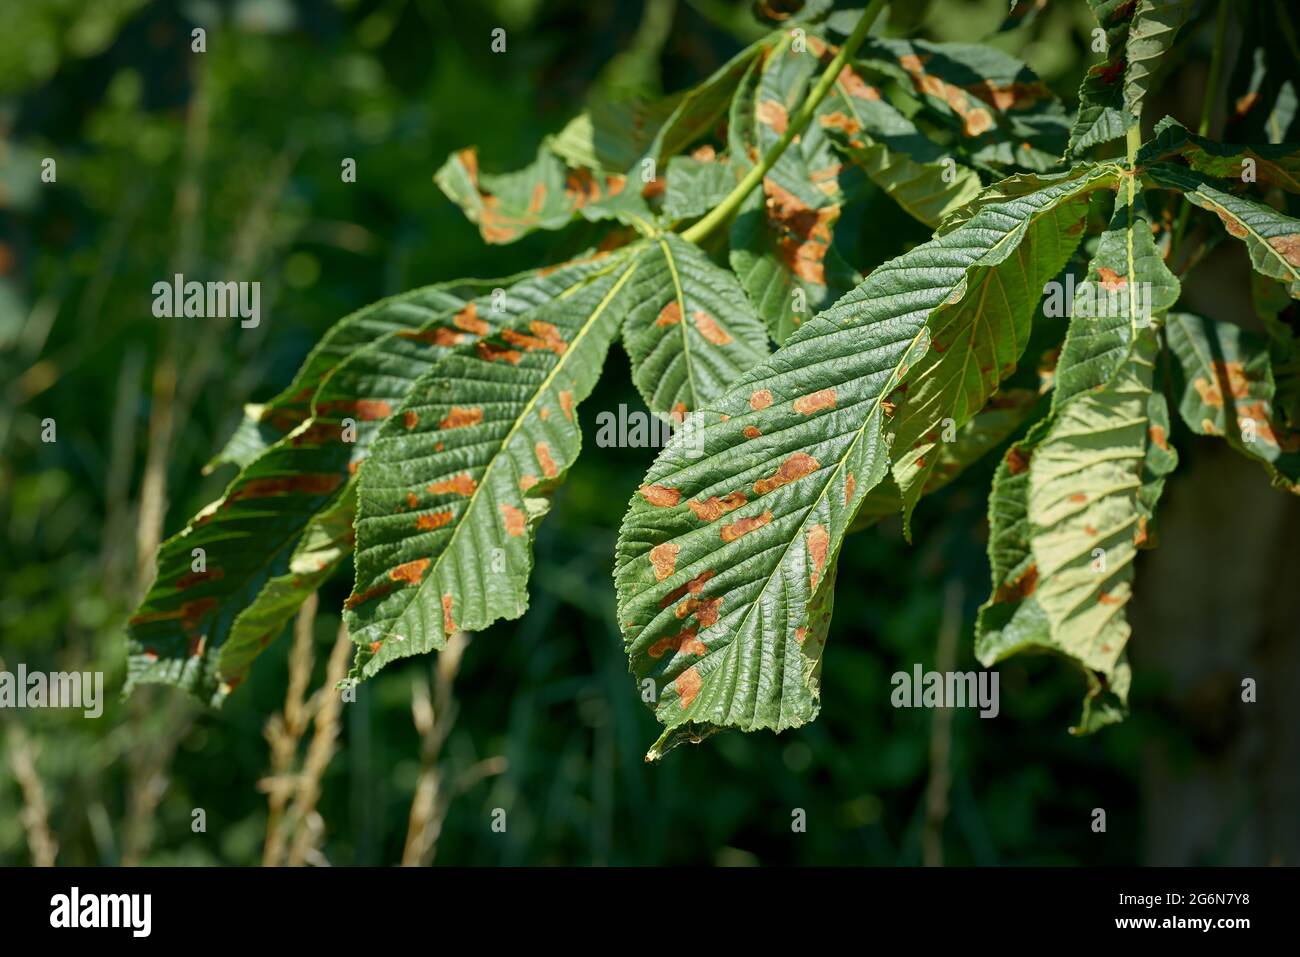 Leaves of a horse chestnut damaged by the leaf miner (Cameraria ohridella) in a park in Germany in summer Stock Photo